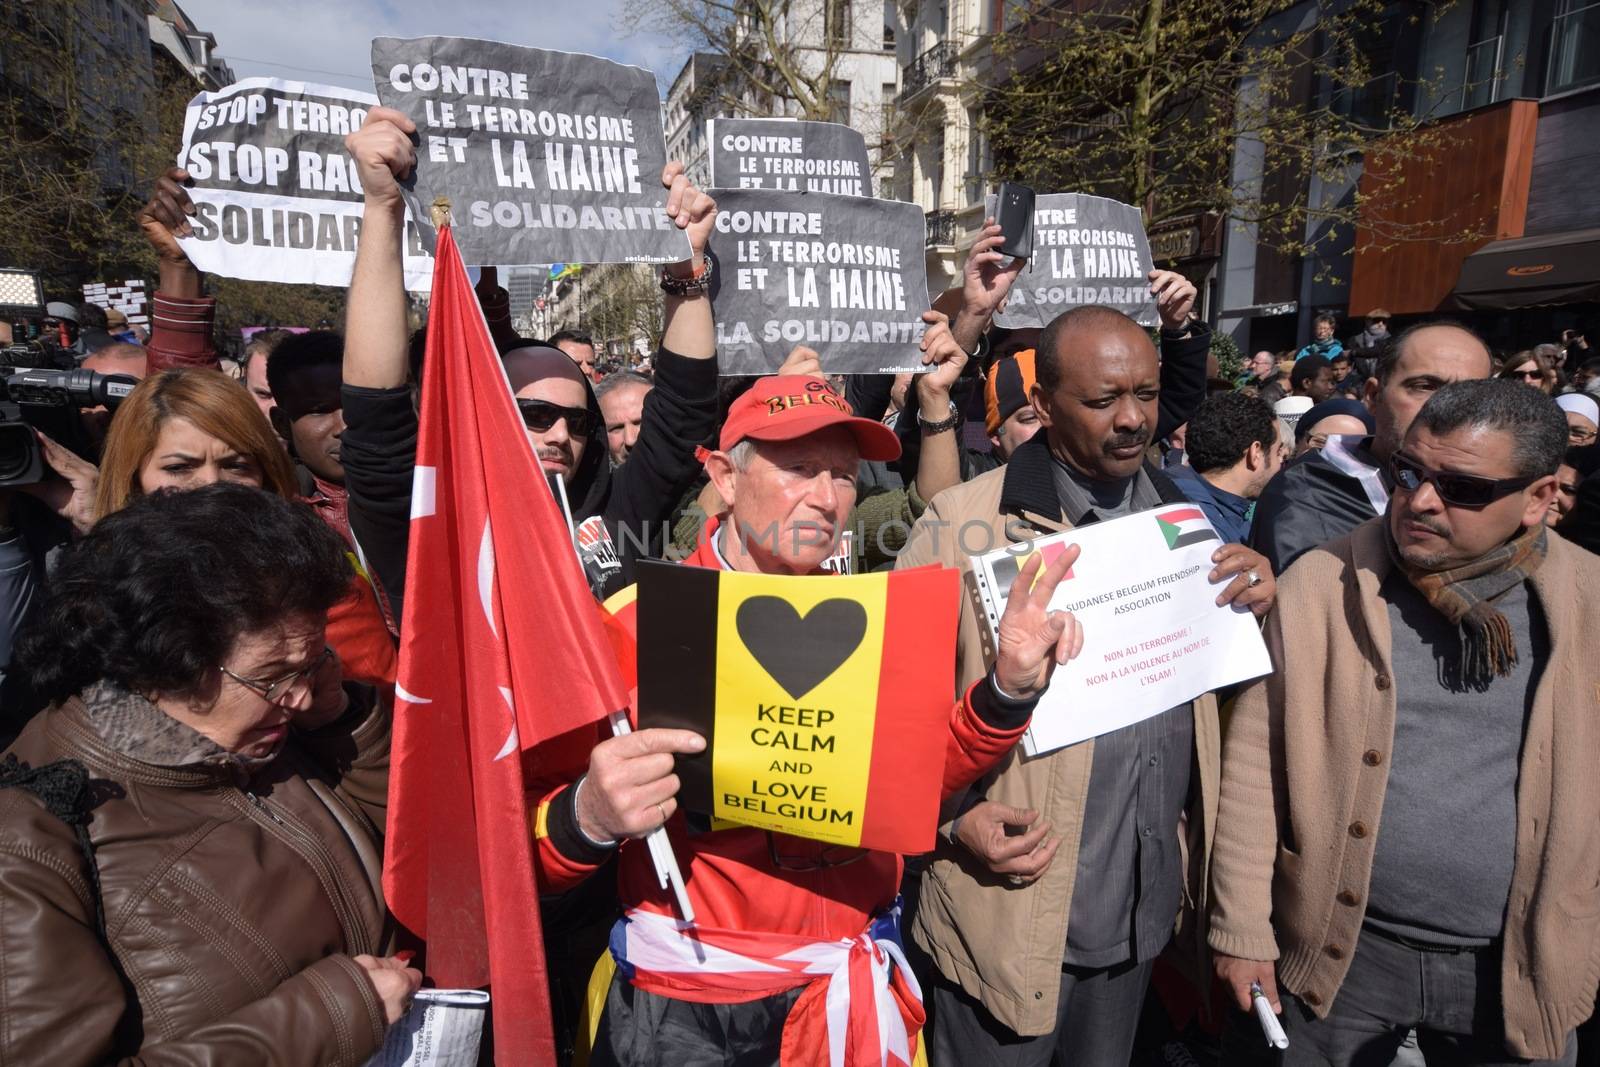 BELGIUM, Brussels : Protesters hold signs reading Against the terrorism and the terrorism and the hate, the solidarity or Stop terrorism, stop racism as they take part in the peaceful march #Tousensemble - #Sameneen against terrorism and hate in the city centre of Brussels on April 17, 2016.At least a thousand people paid a tribute to the victims of the terror attack of March 22 in the streets of Brussels during the peaceful march organised by citizens associations. 